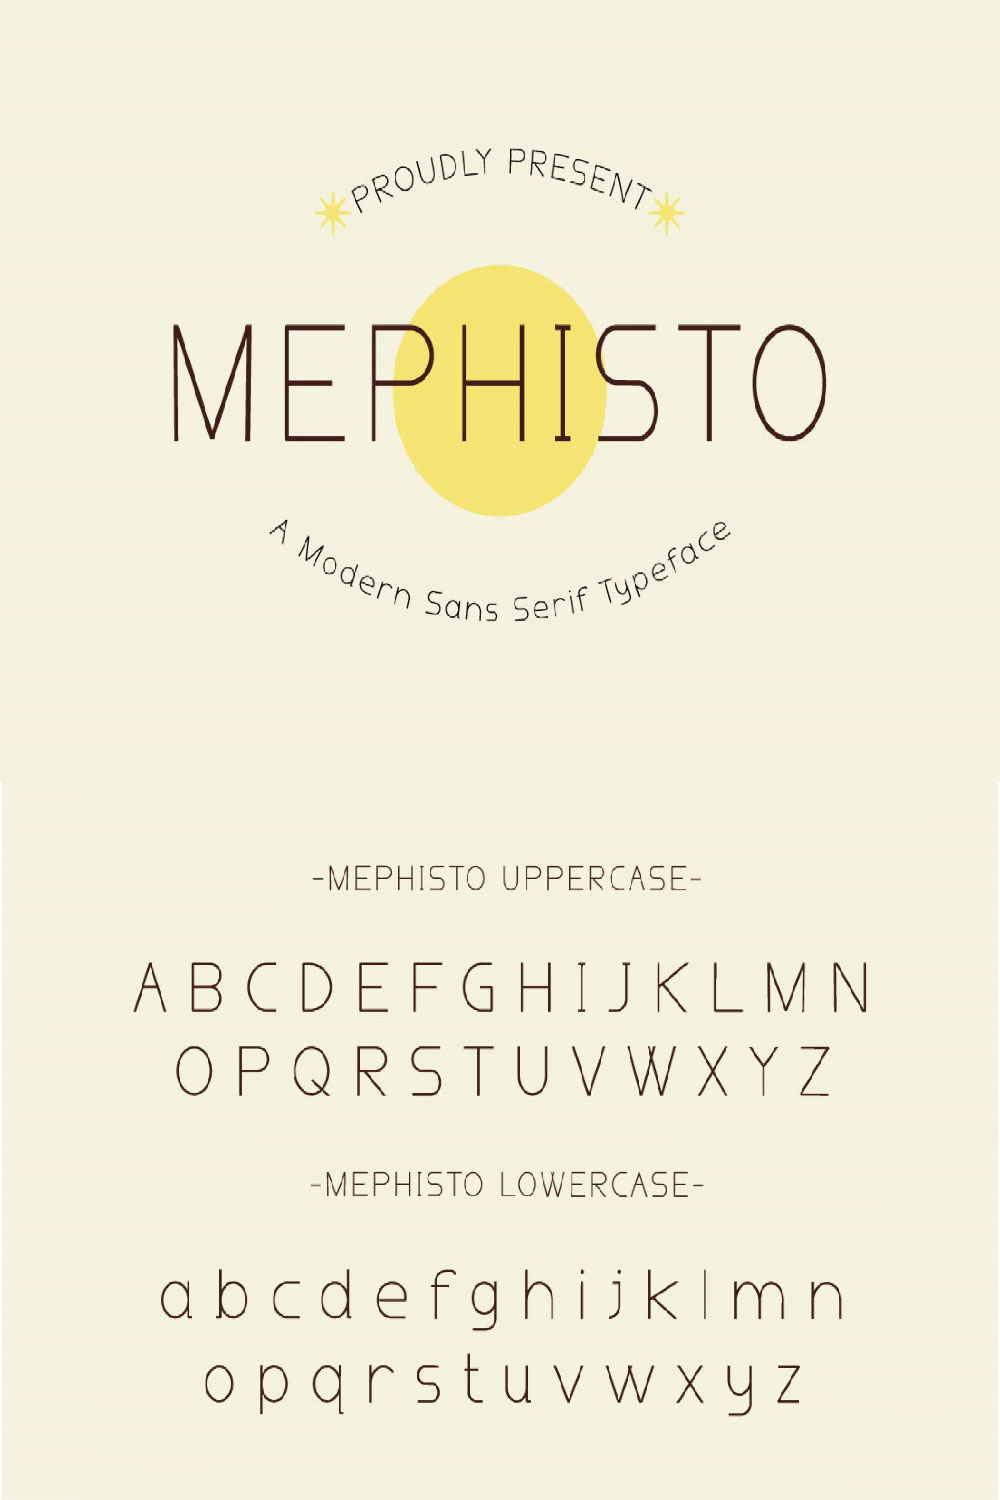 Mephisto pinterest preview image.